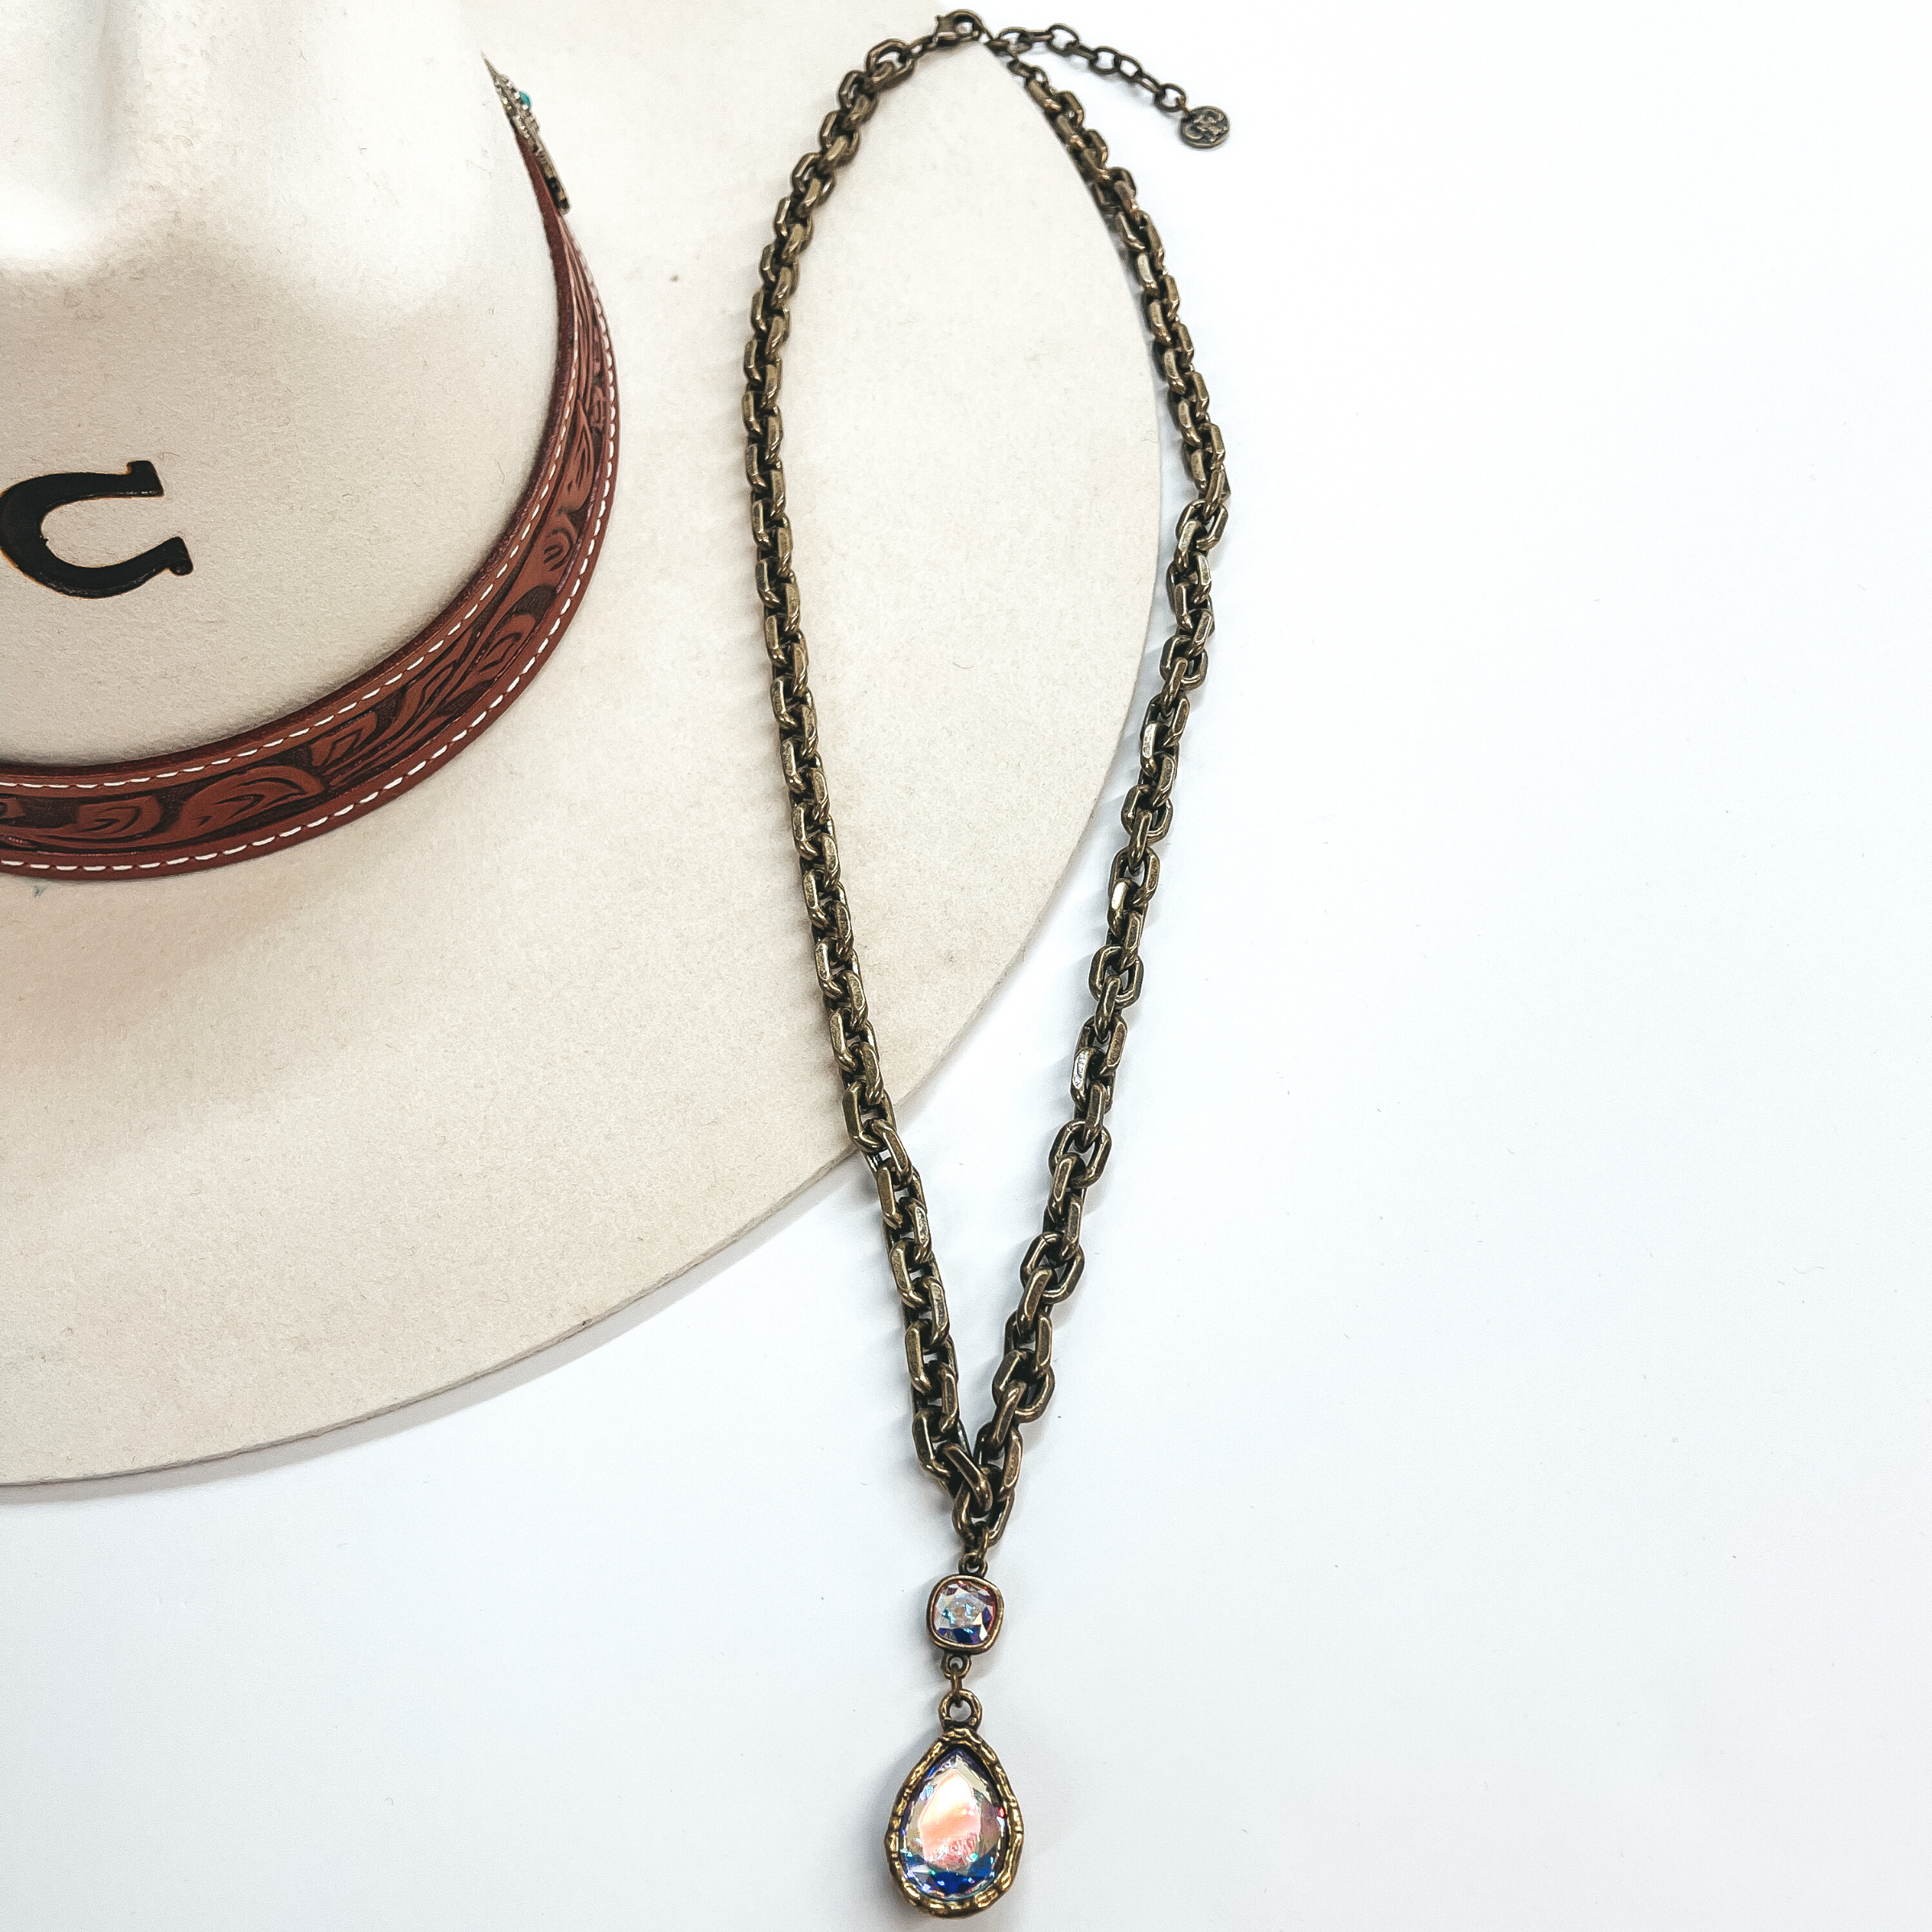 This is a long, thick link chain necklace in bronze  with an AB cushion cut crystal connected to an AB  crystal teardrop. This necklace is taken laying on  an ivory colored Charlie Horse hat and white  background.